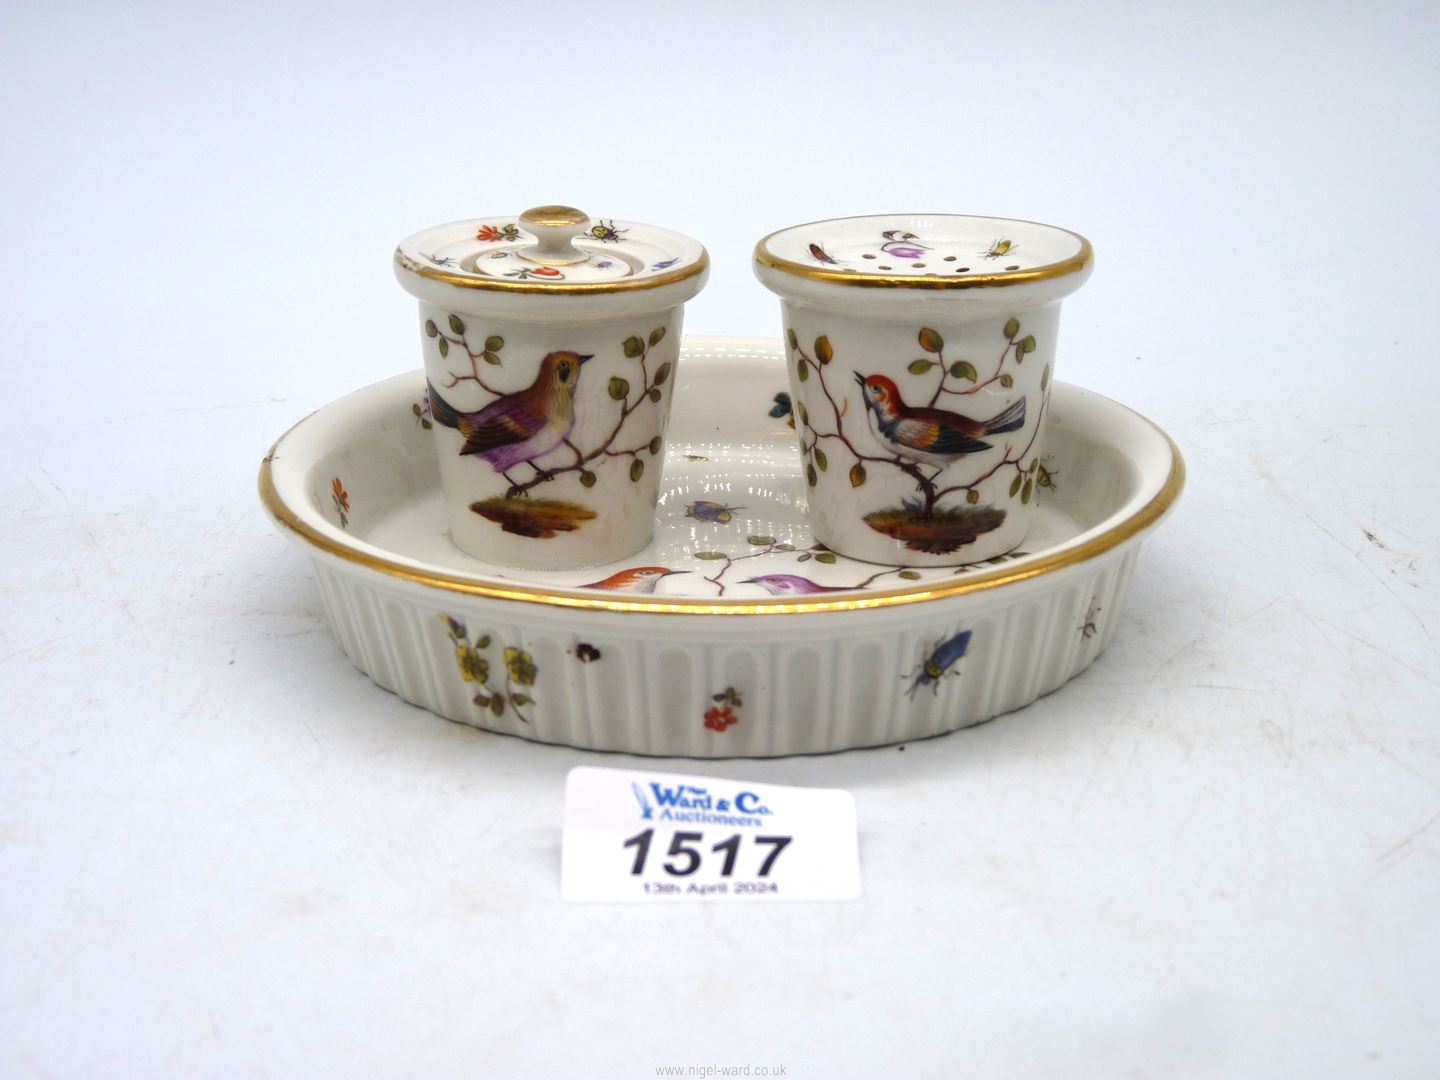 An antique continental porcelain desk set with tray and attached ink well with lid and a sander. - Image 4 of 4